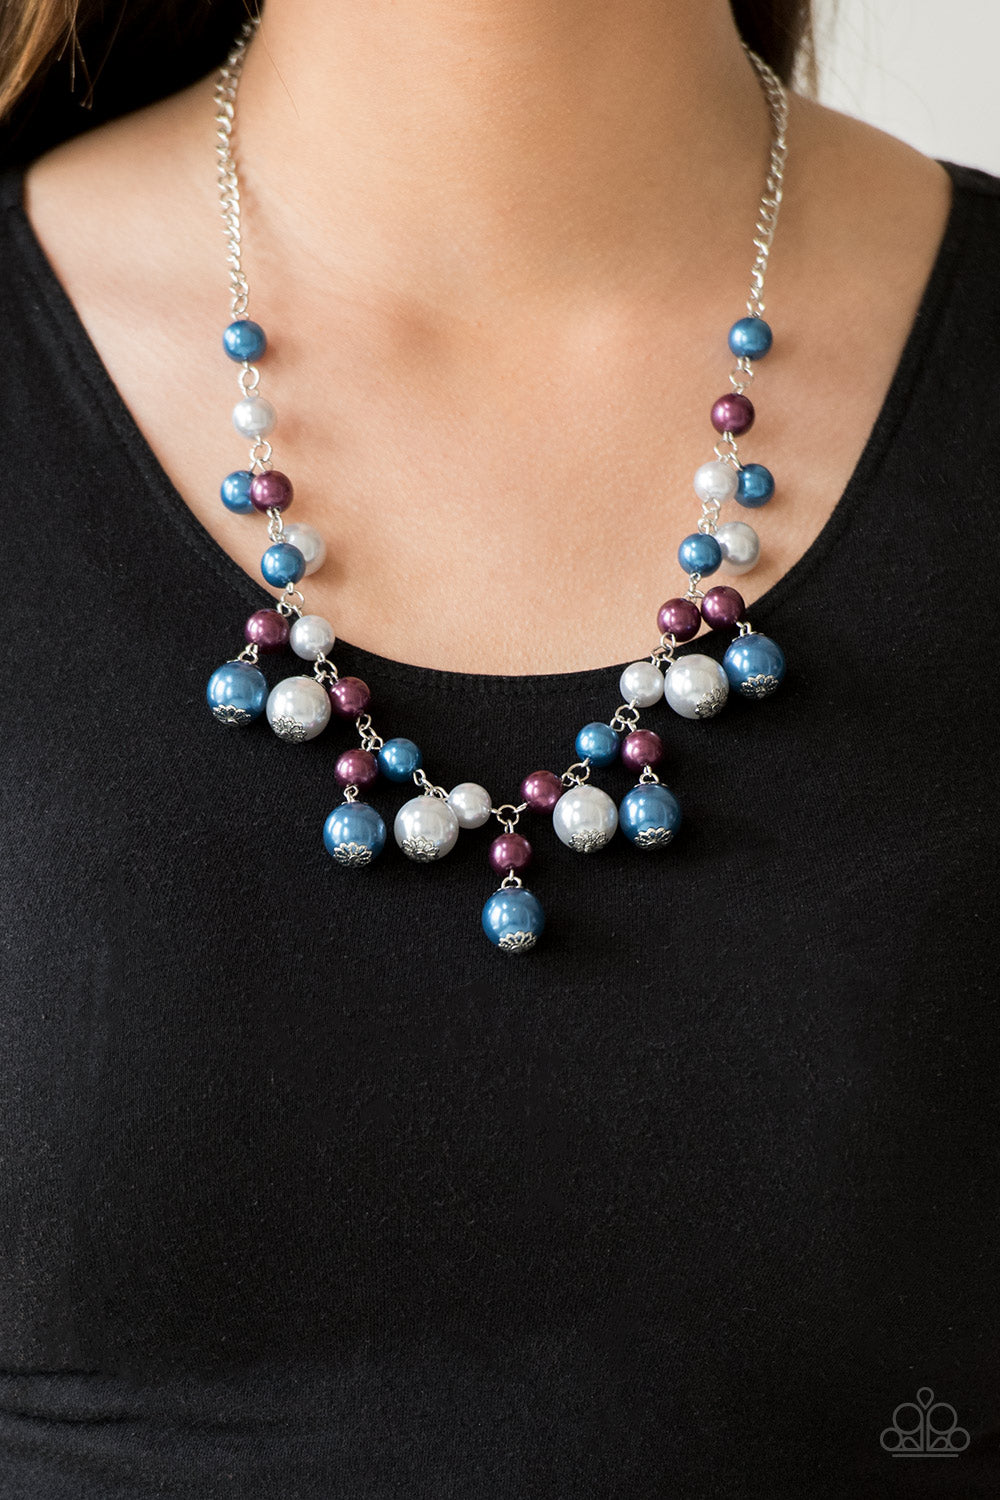 Varying in size, bubbly blue, purple, and silver pearls swing from the bottom of a classic strand of pearls, creating a refined fringe below the collar. Features an adjustable clasp closure.  Sold as one individual necklace. Includes one pair of matching earrings.